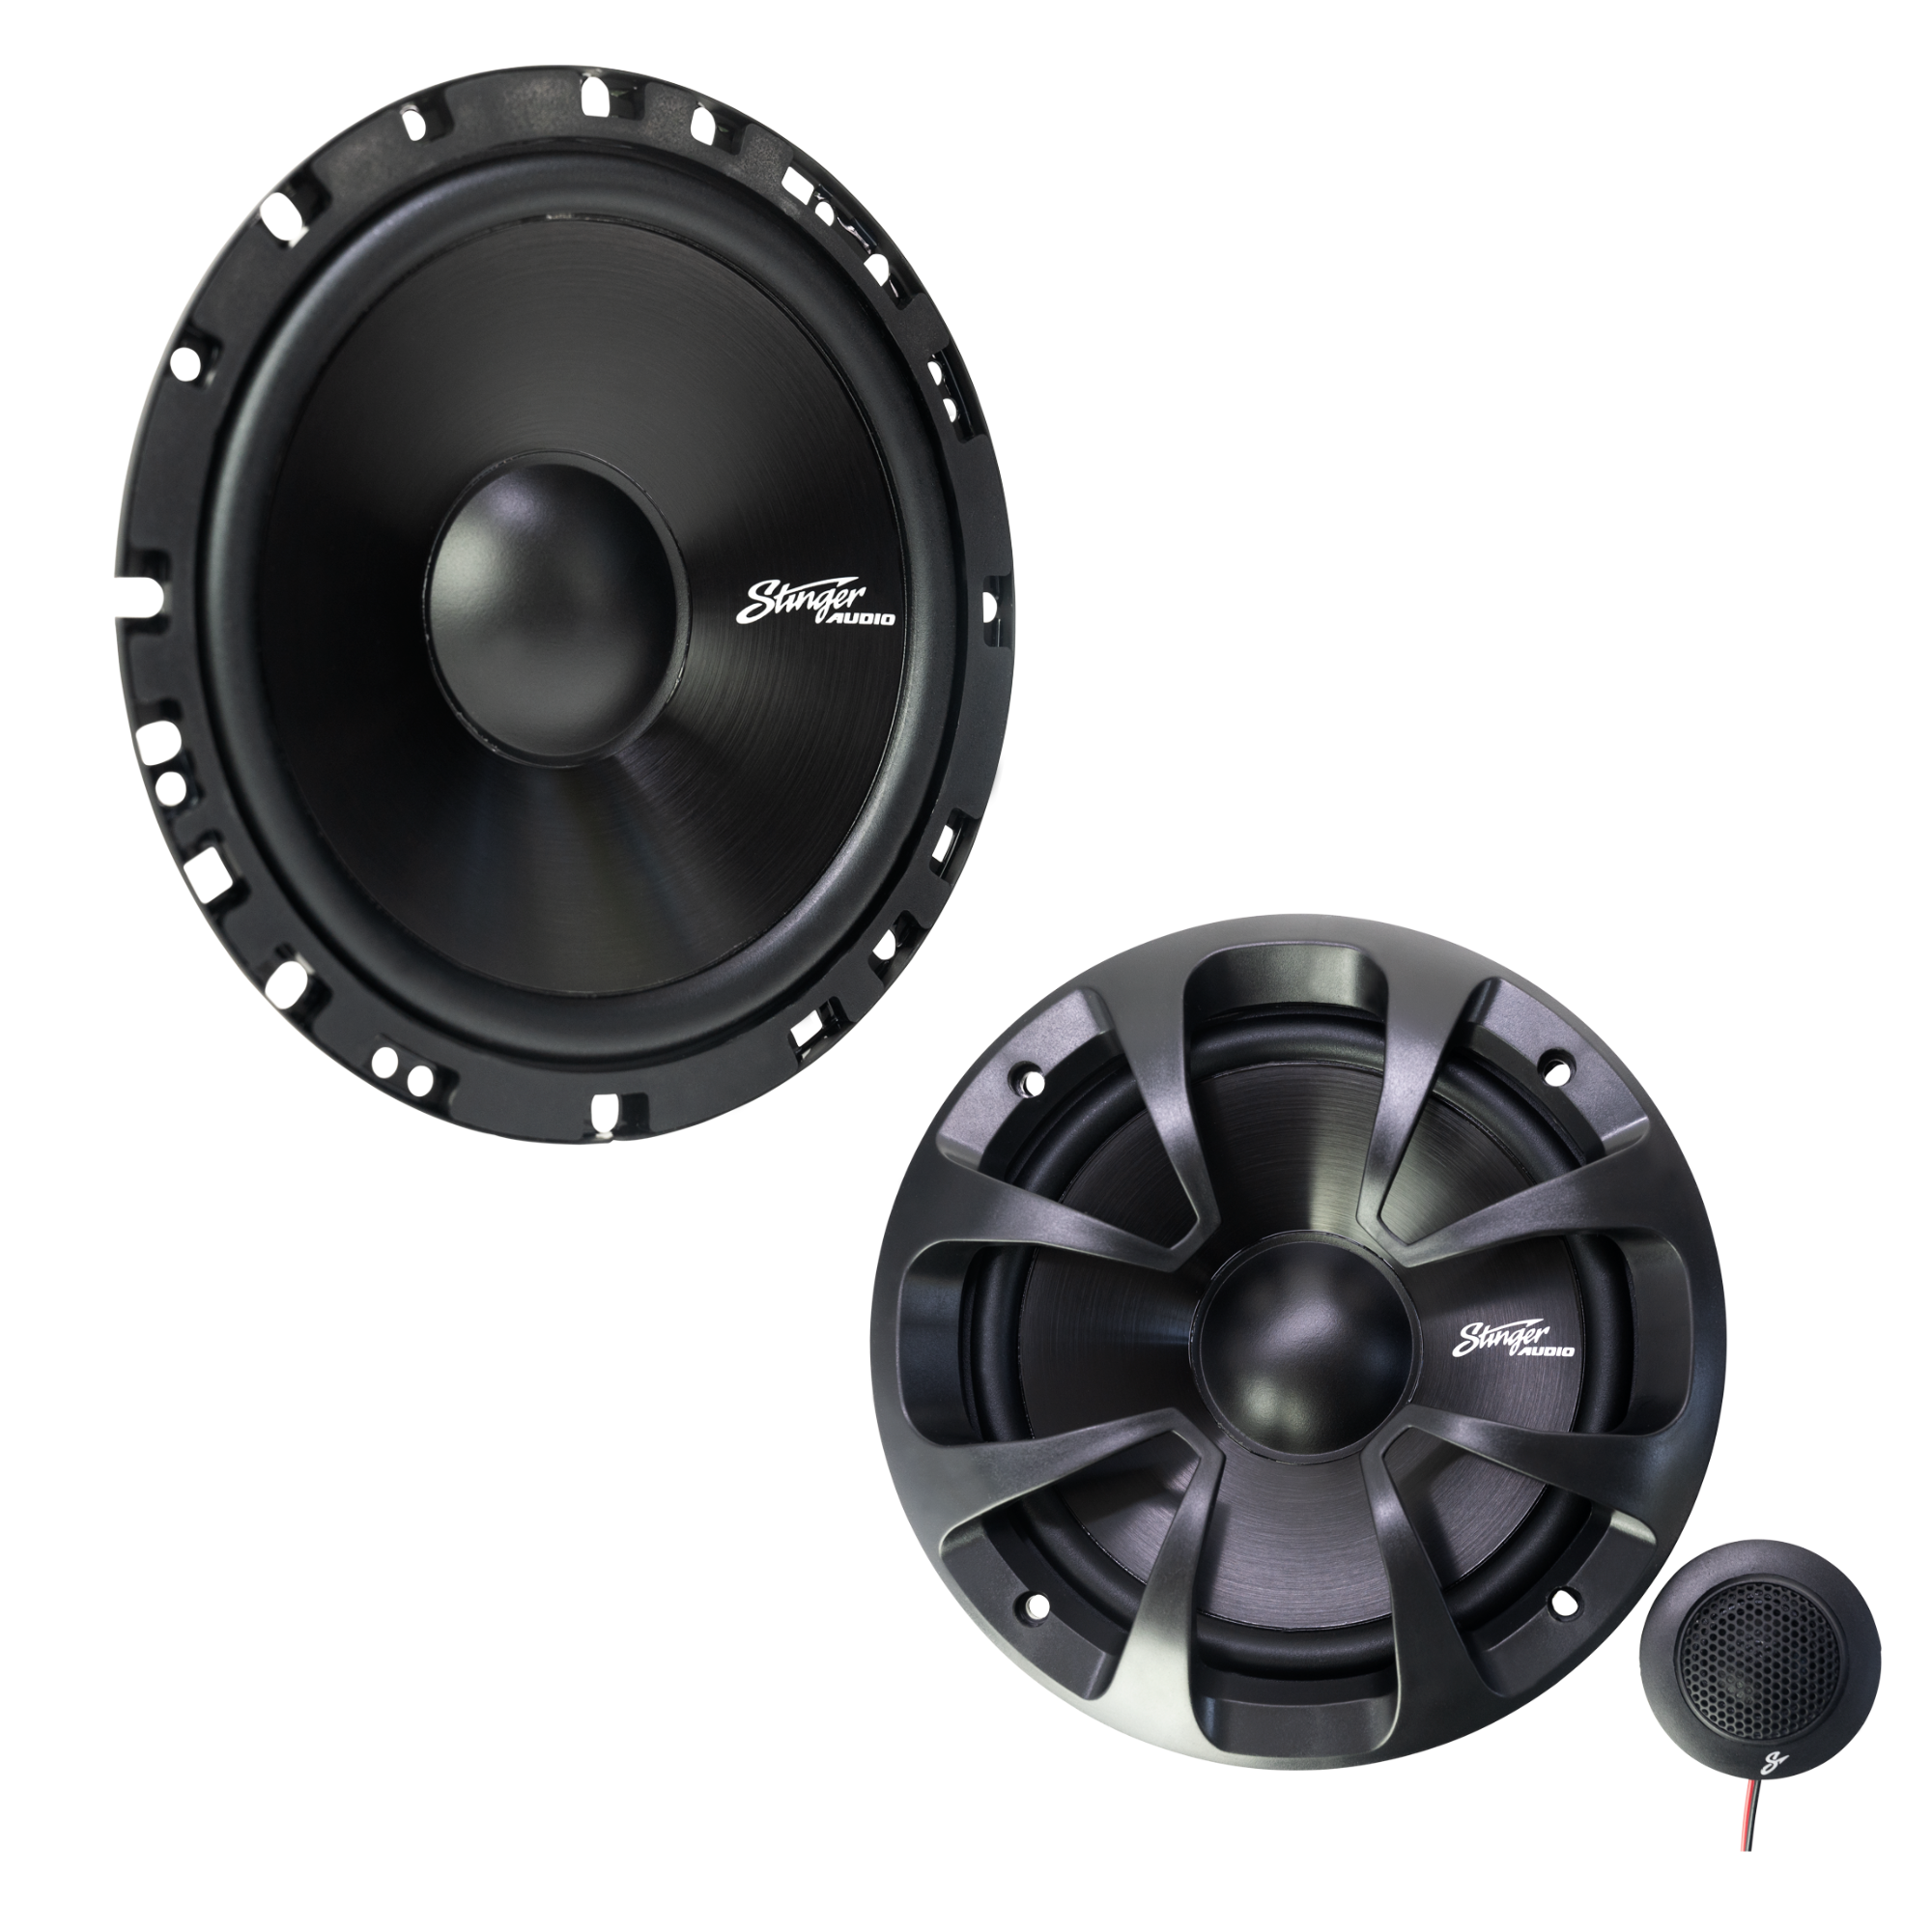 Stinger Audio 6.5" 50 Watt (RMS) Component Car Speakers (Set of Two; one with grill and one without) and a wired tweeter on a white background